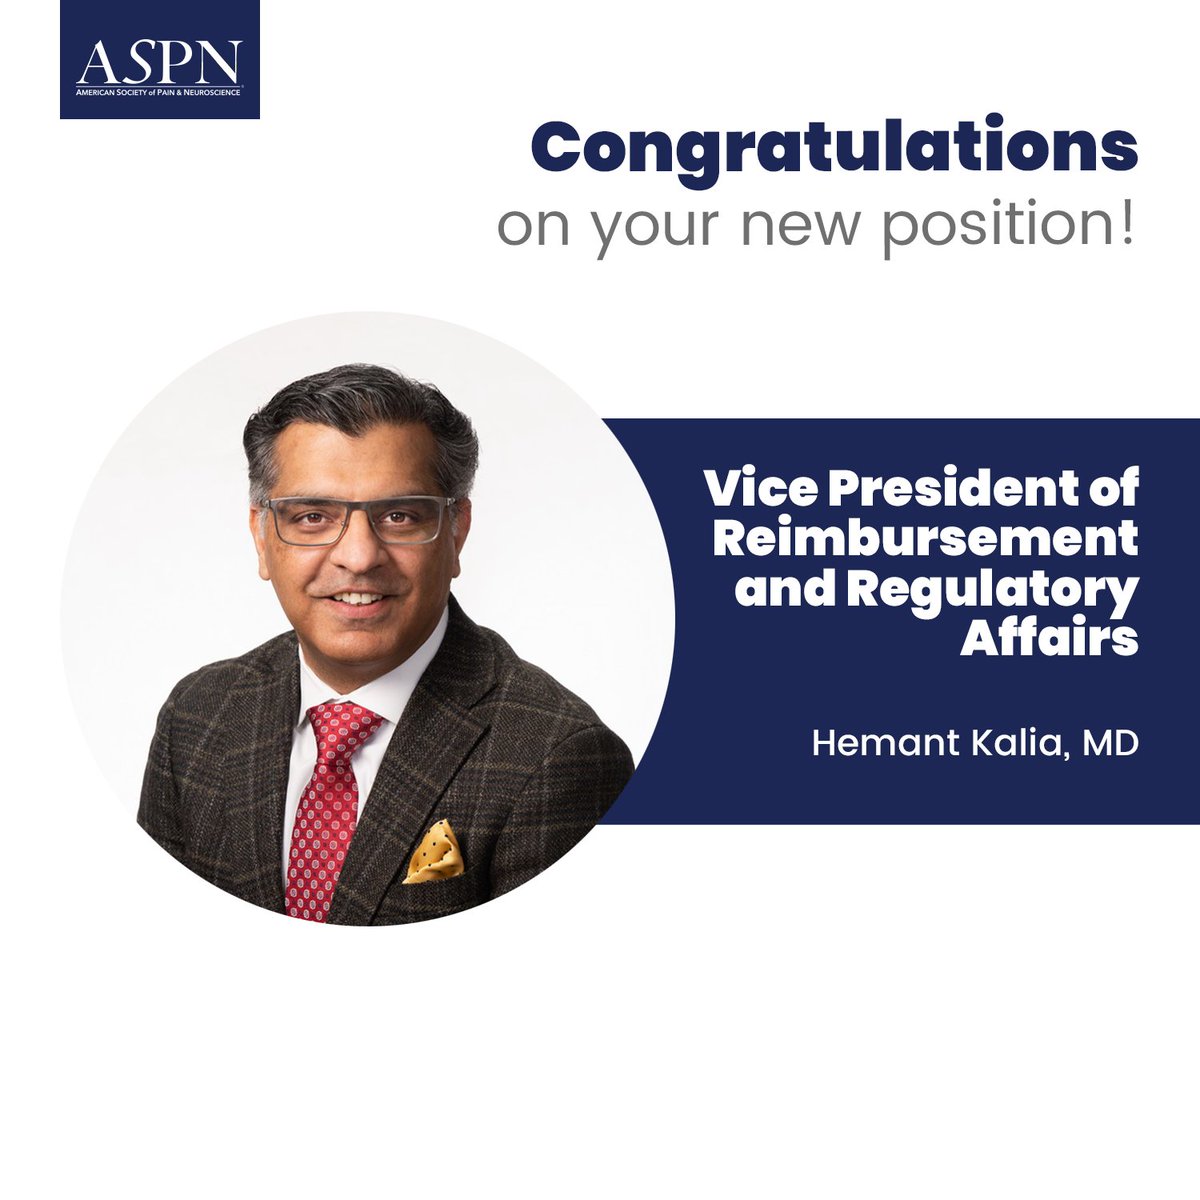 A heartfelt congratulations to Dr. Hemant Kalia for his incredible achievement in being appointed as the Vice President of Reimbursement and Regulatory Affairs! Help us congratulate Dr. Kalia! #Congratulations #HealthcareLeadership #RegulatoryAffairs